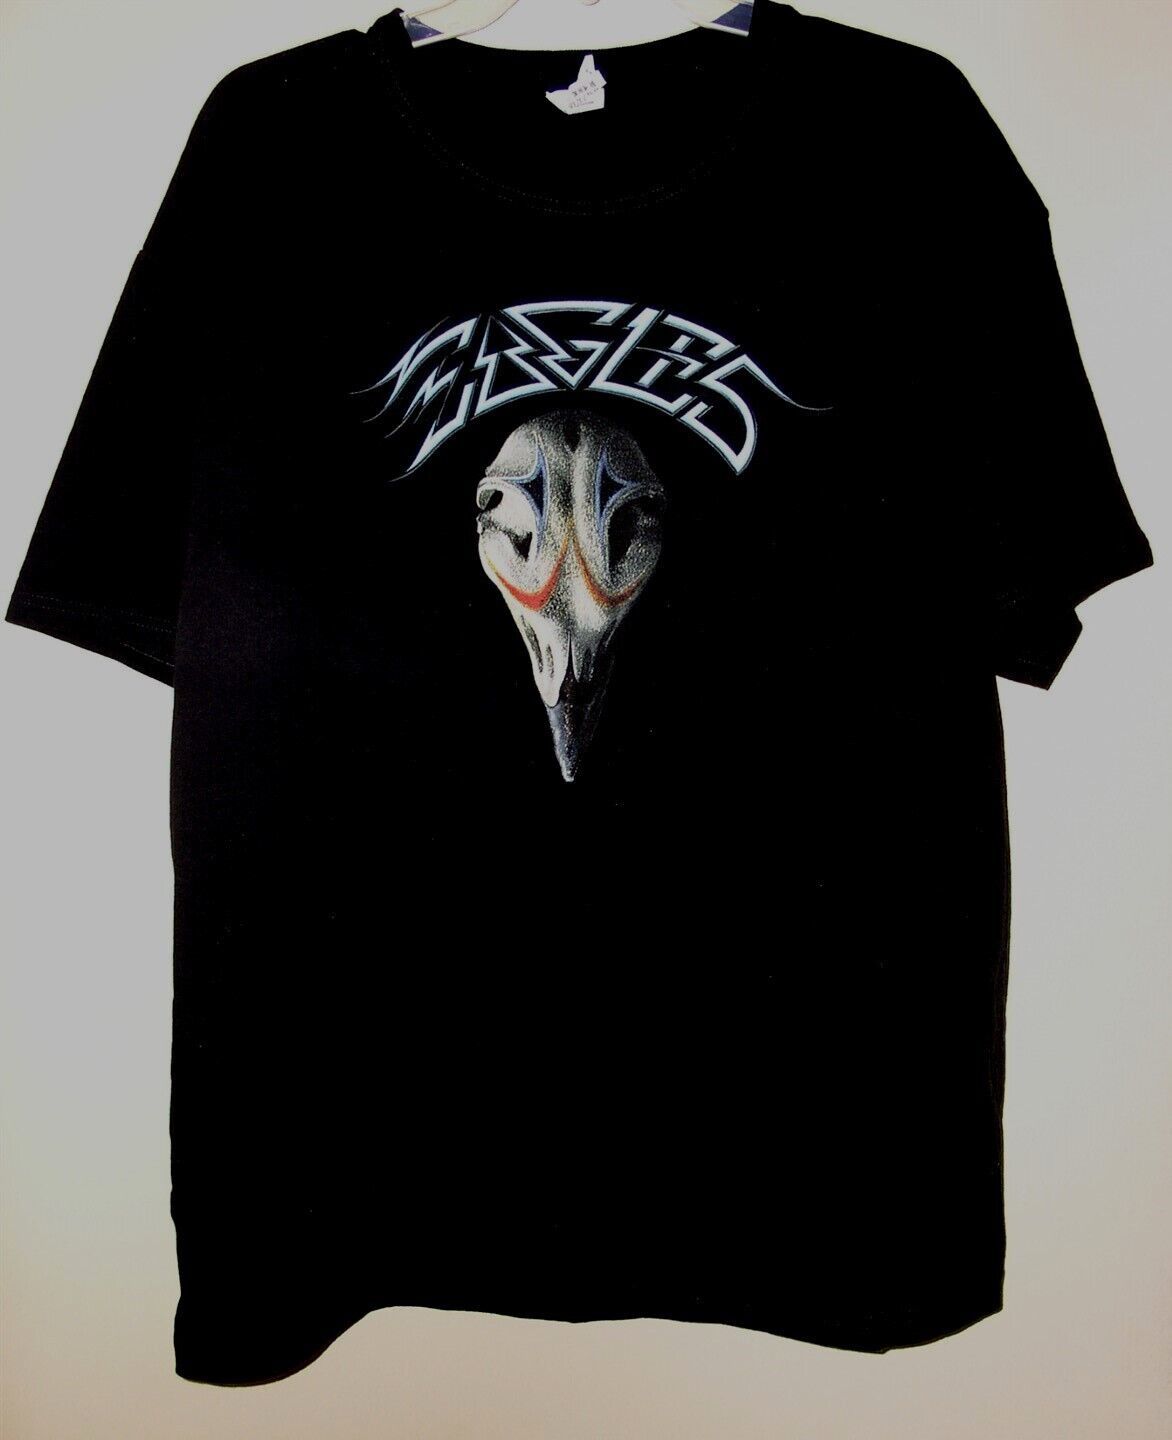 Primary image for Eagles Band Concert Tour T Shirt Eagle Skull With Logo Vintage Size X-Large